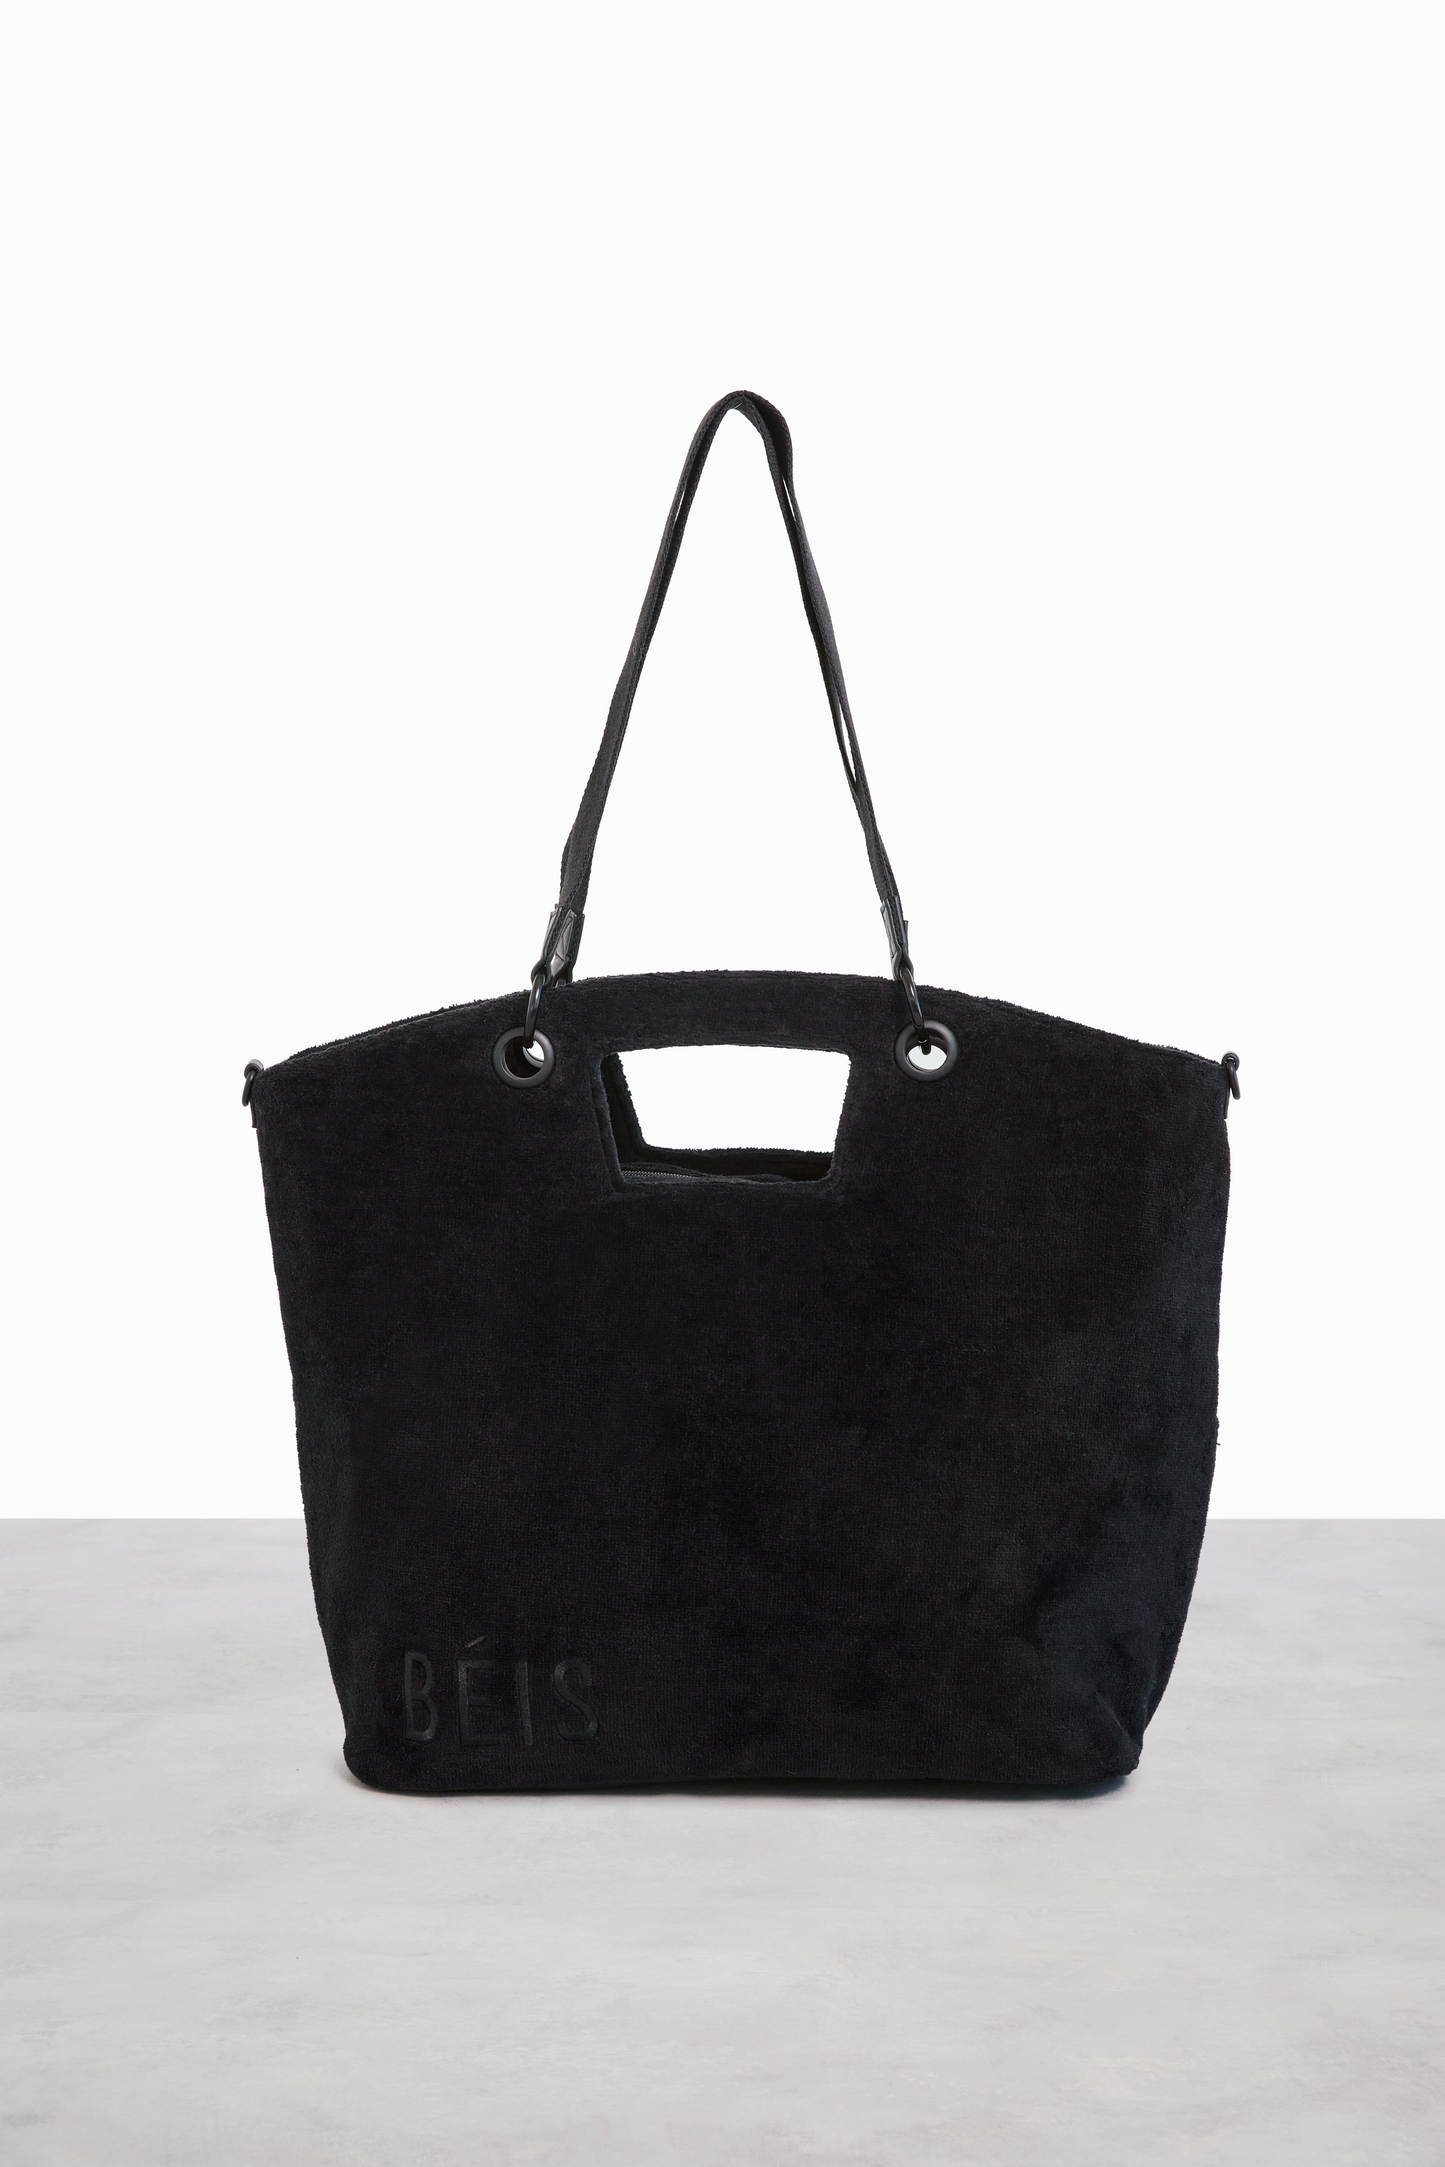 The Terry Tote in Black